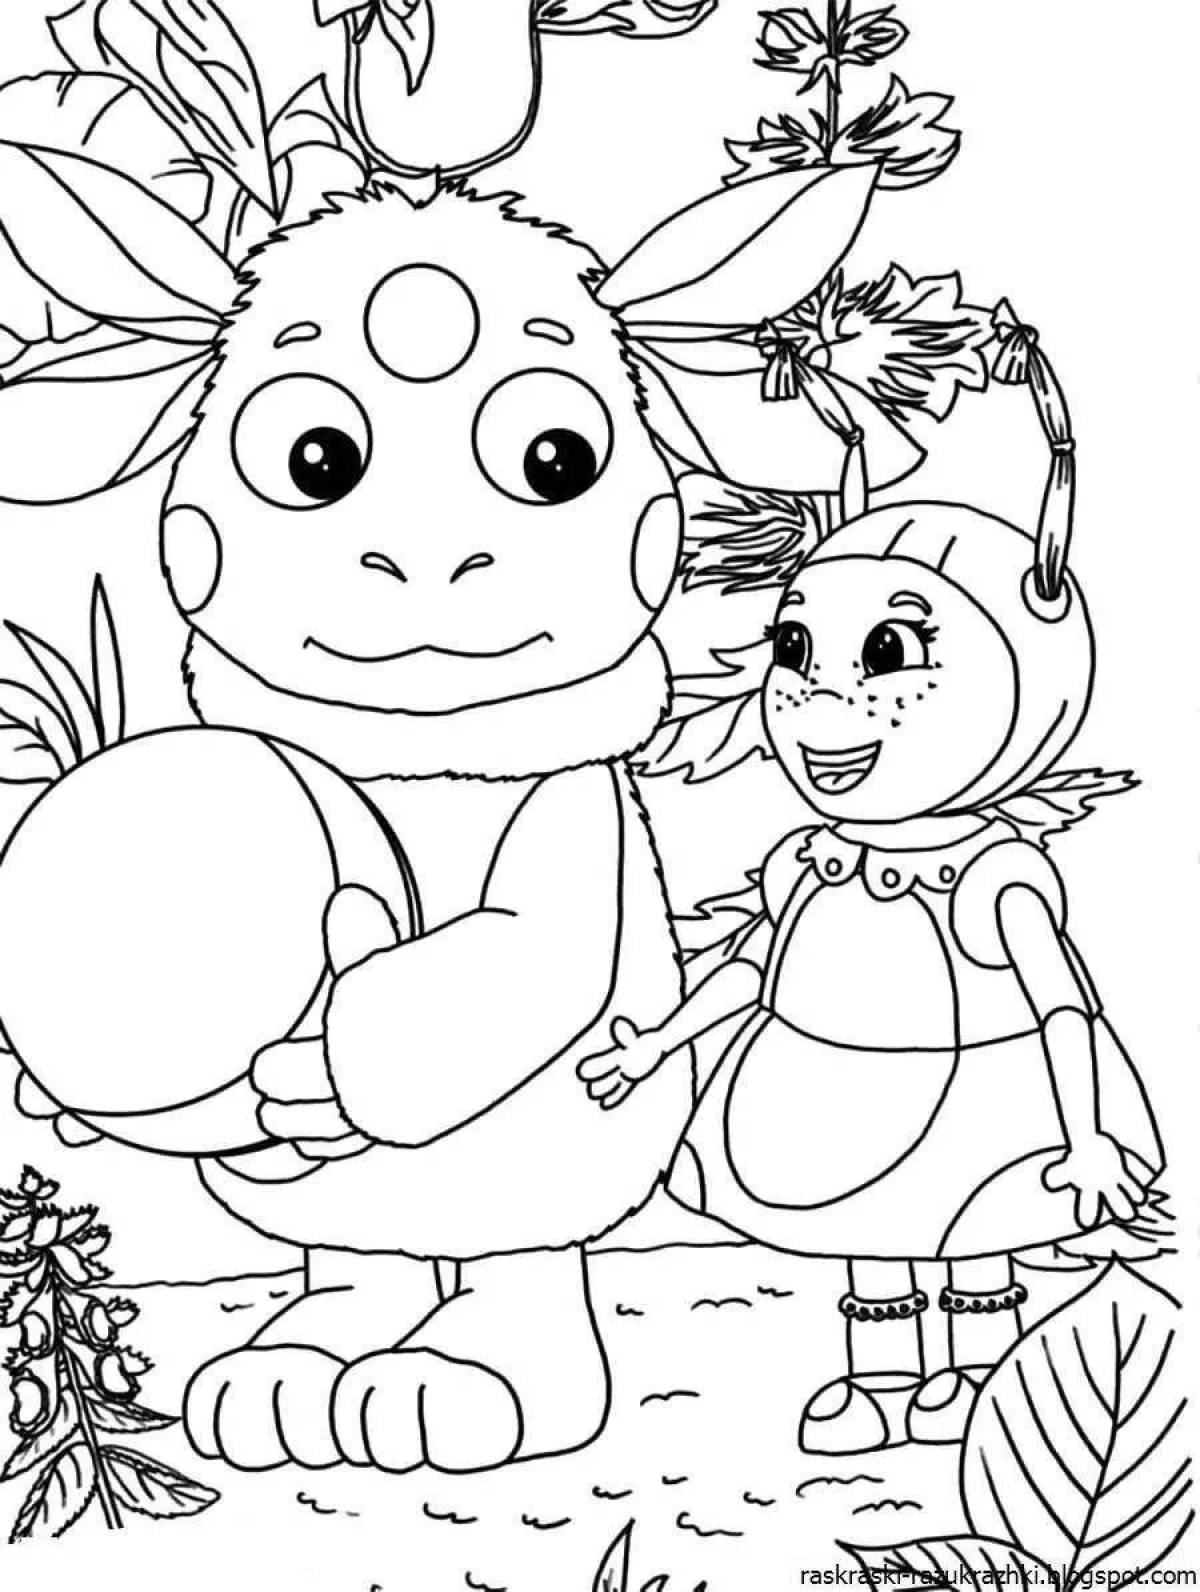 Creative cartoon coloring book for 6-7 year old girls